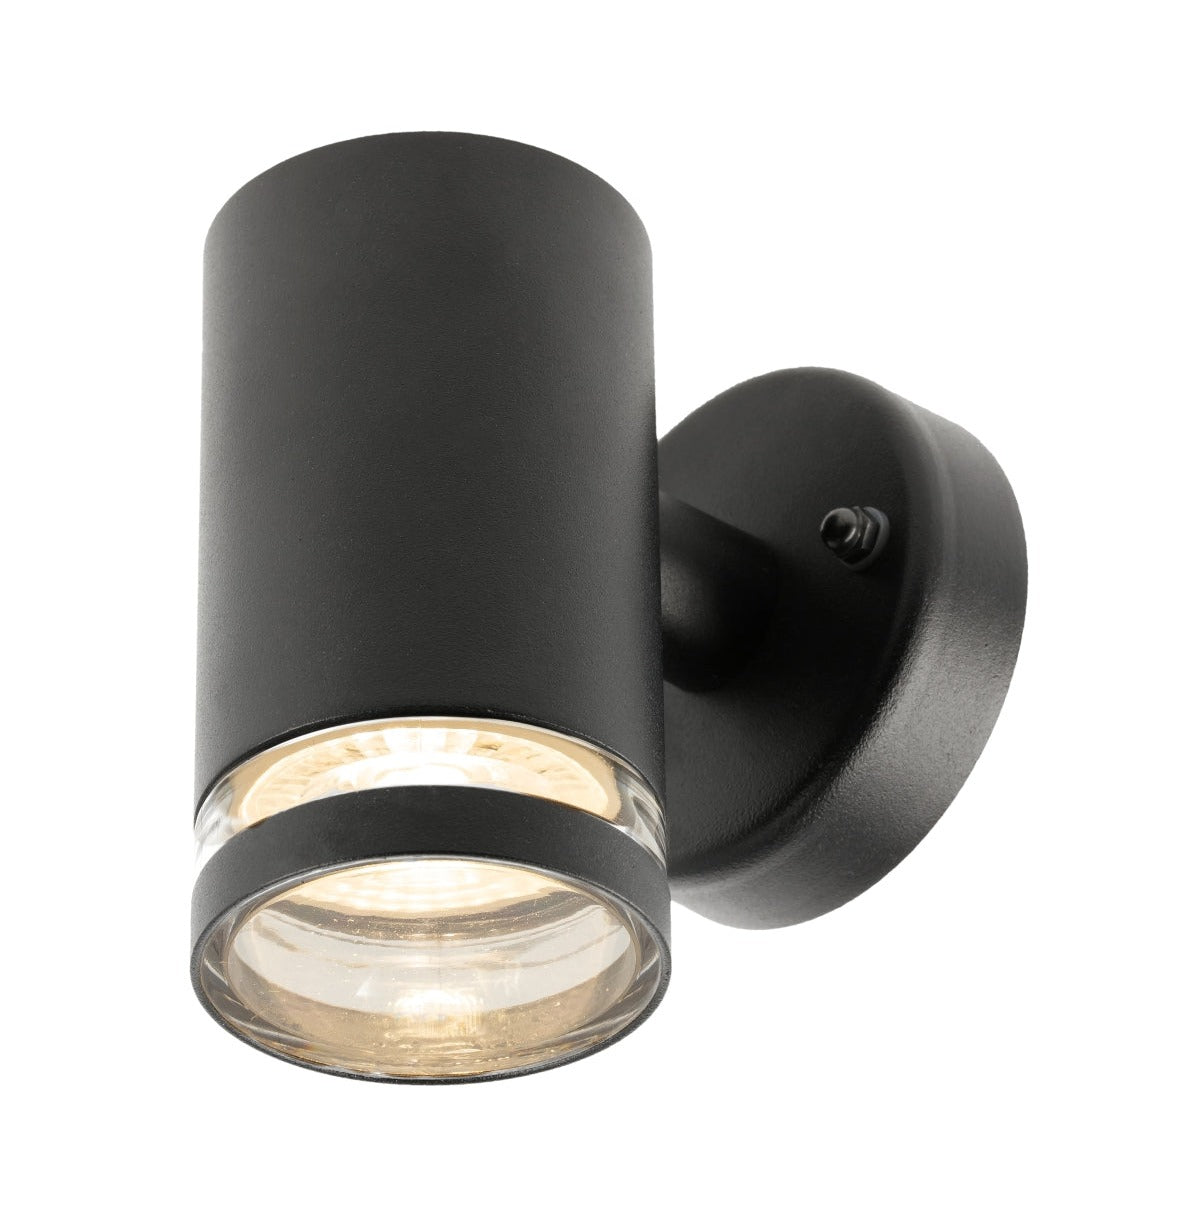 Our Jennifer black outdoor wall mounted cylinder outdoor light would look perfect in a modern or more traditional home design. Outside wall lights can provide atmospheric light in your garden, at the front door or on the terrace as well as a great security solution. It is designed for durability and longevity with its robust material producing a fully weatherproof and water resistant light fitting.